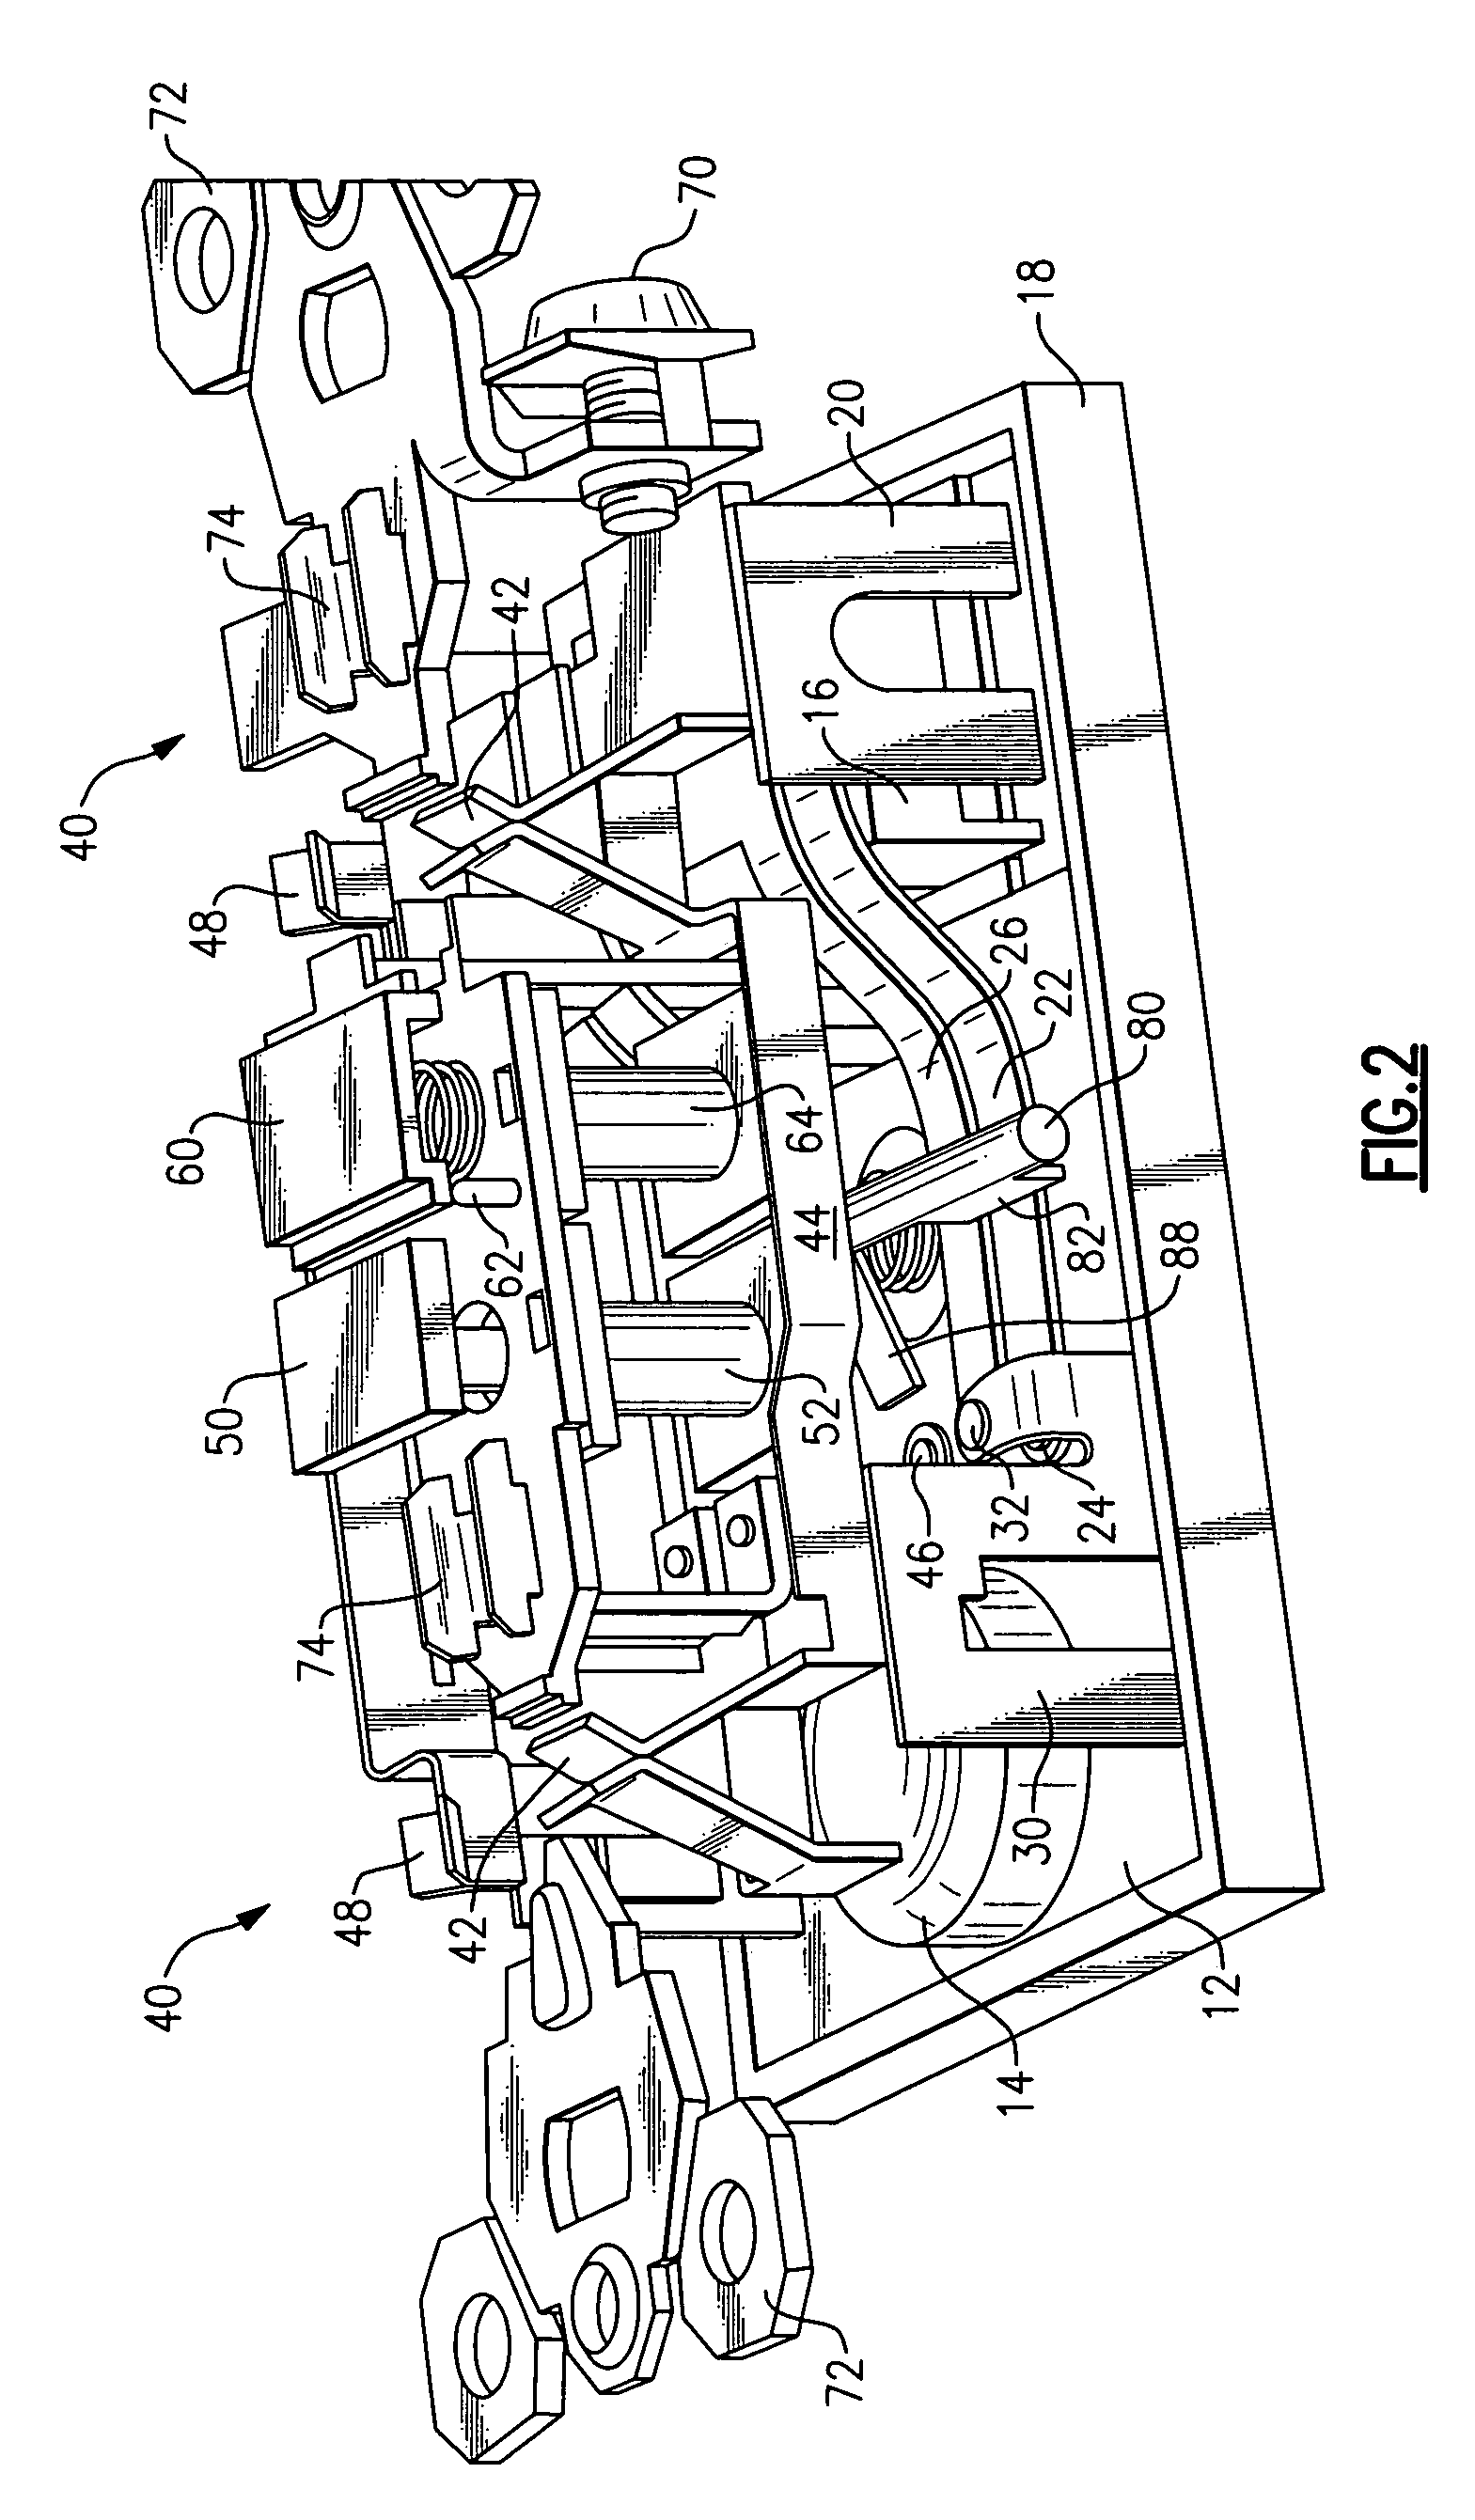 Protection device with a sandwiched cantilever breaker mechanism